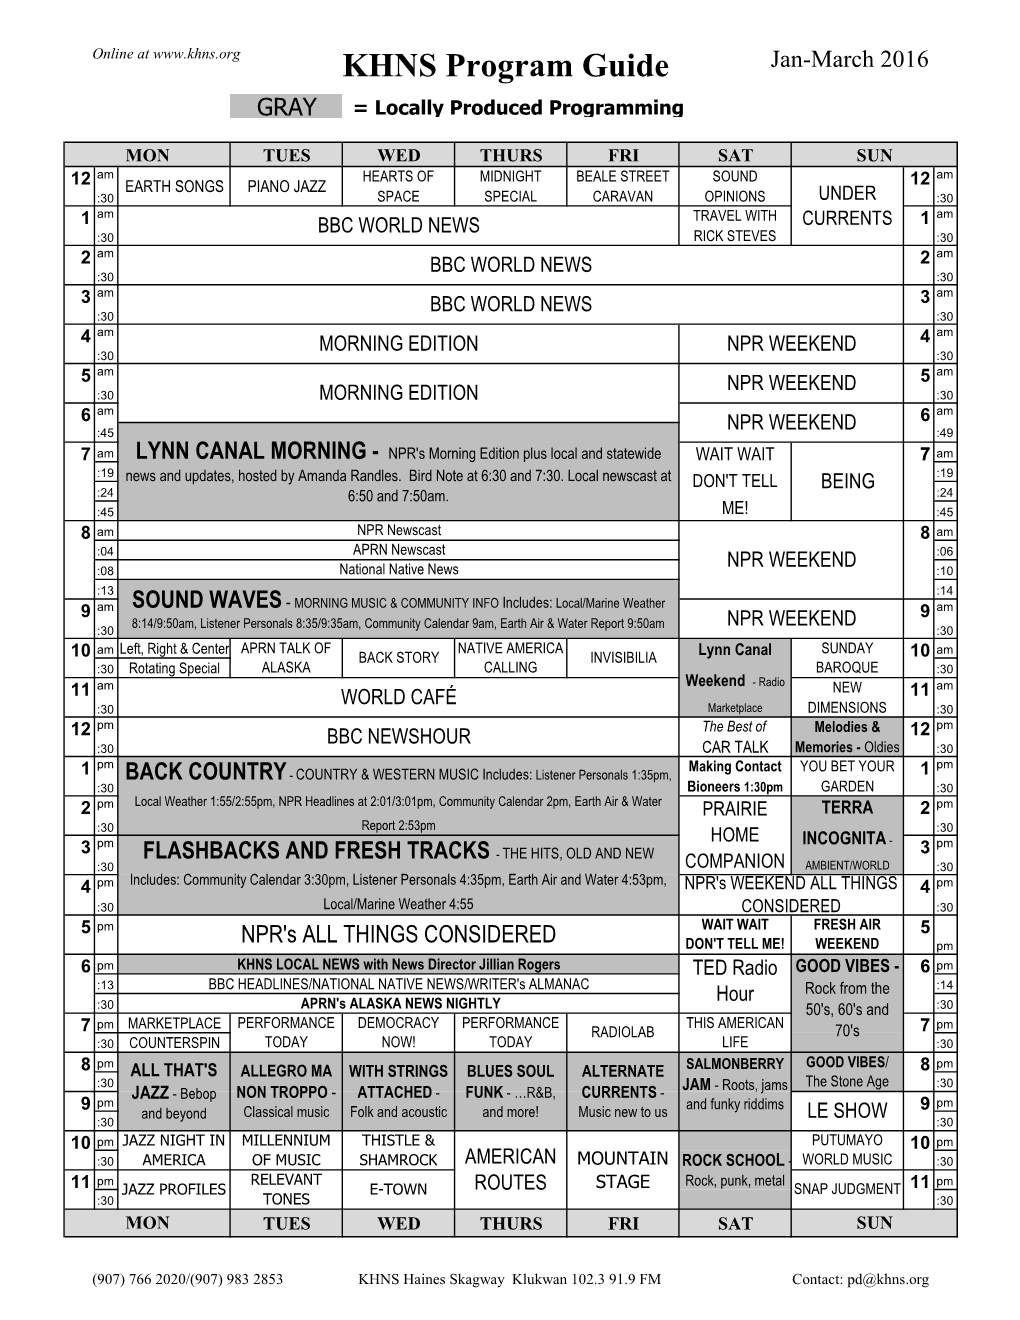 KHNS Program Guide Jan-March 2016 GRAY = Locally Produced Programming